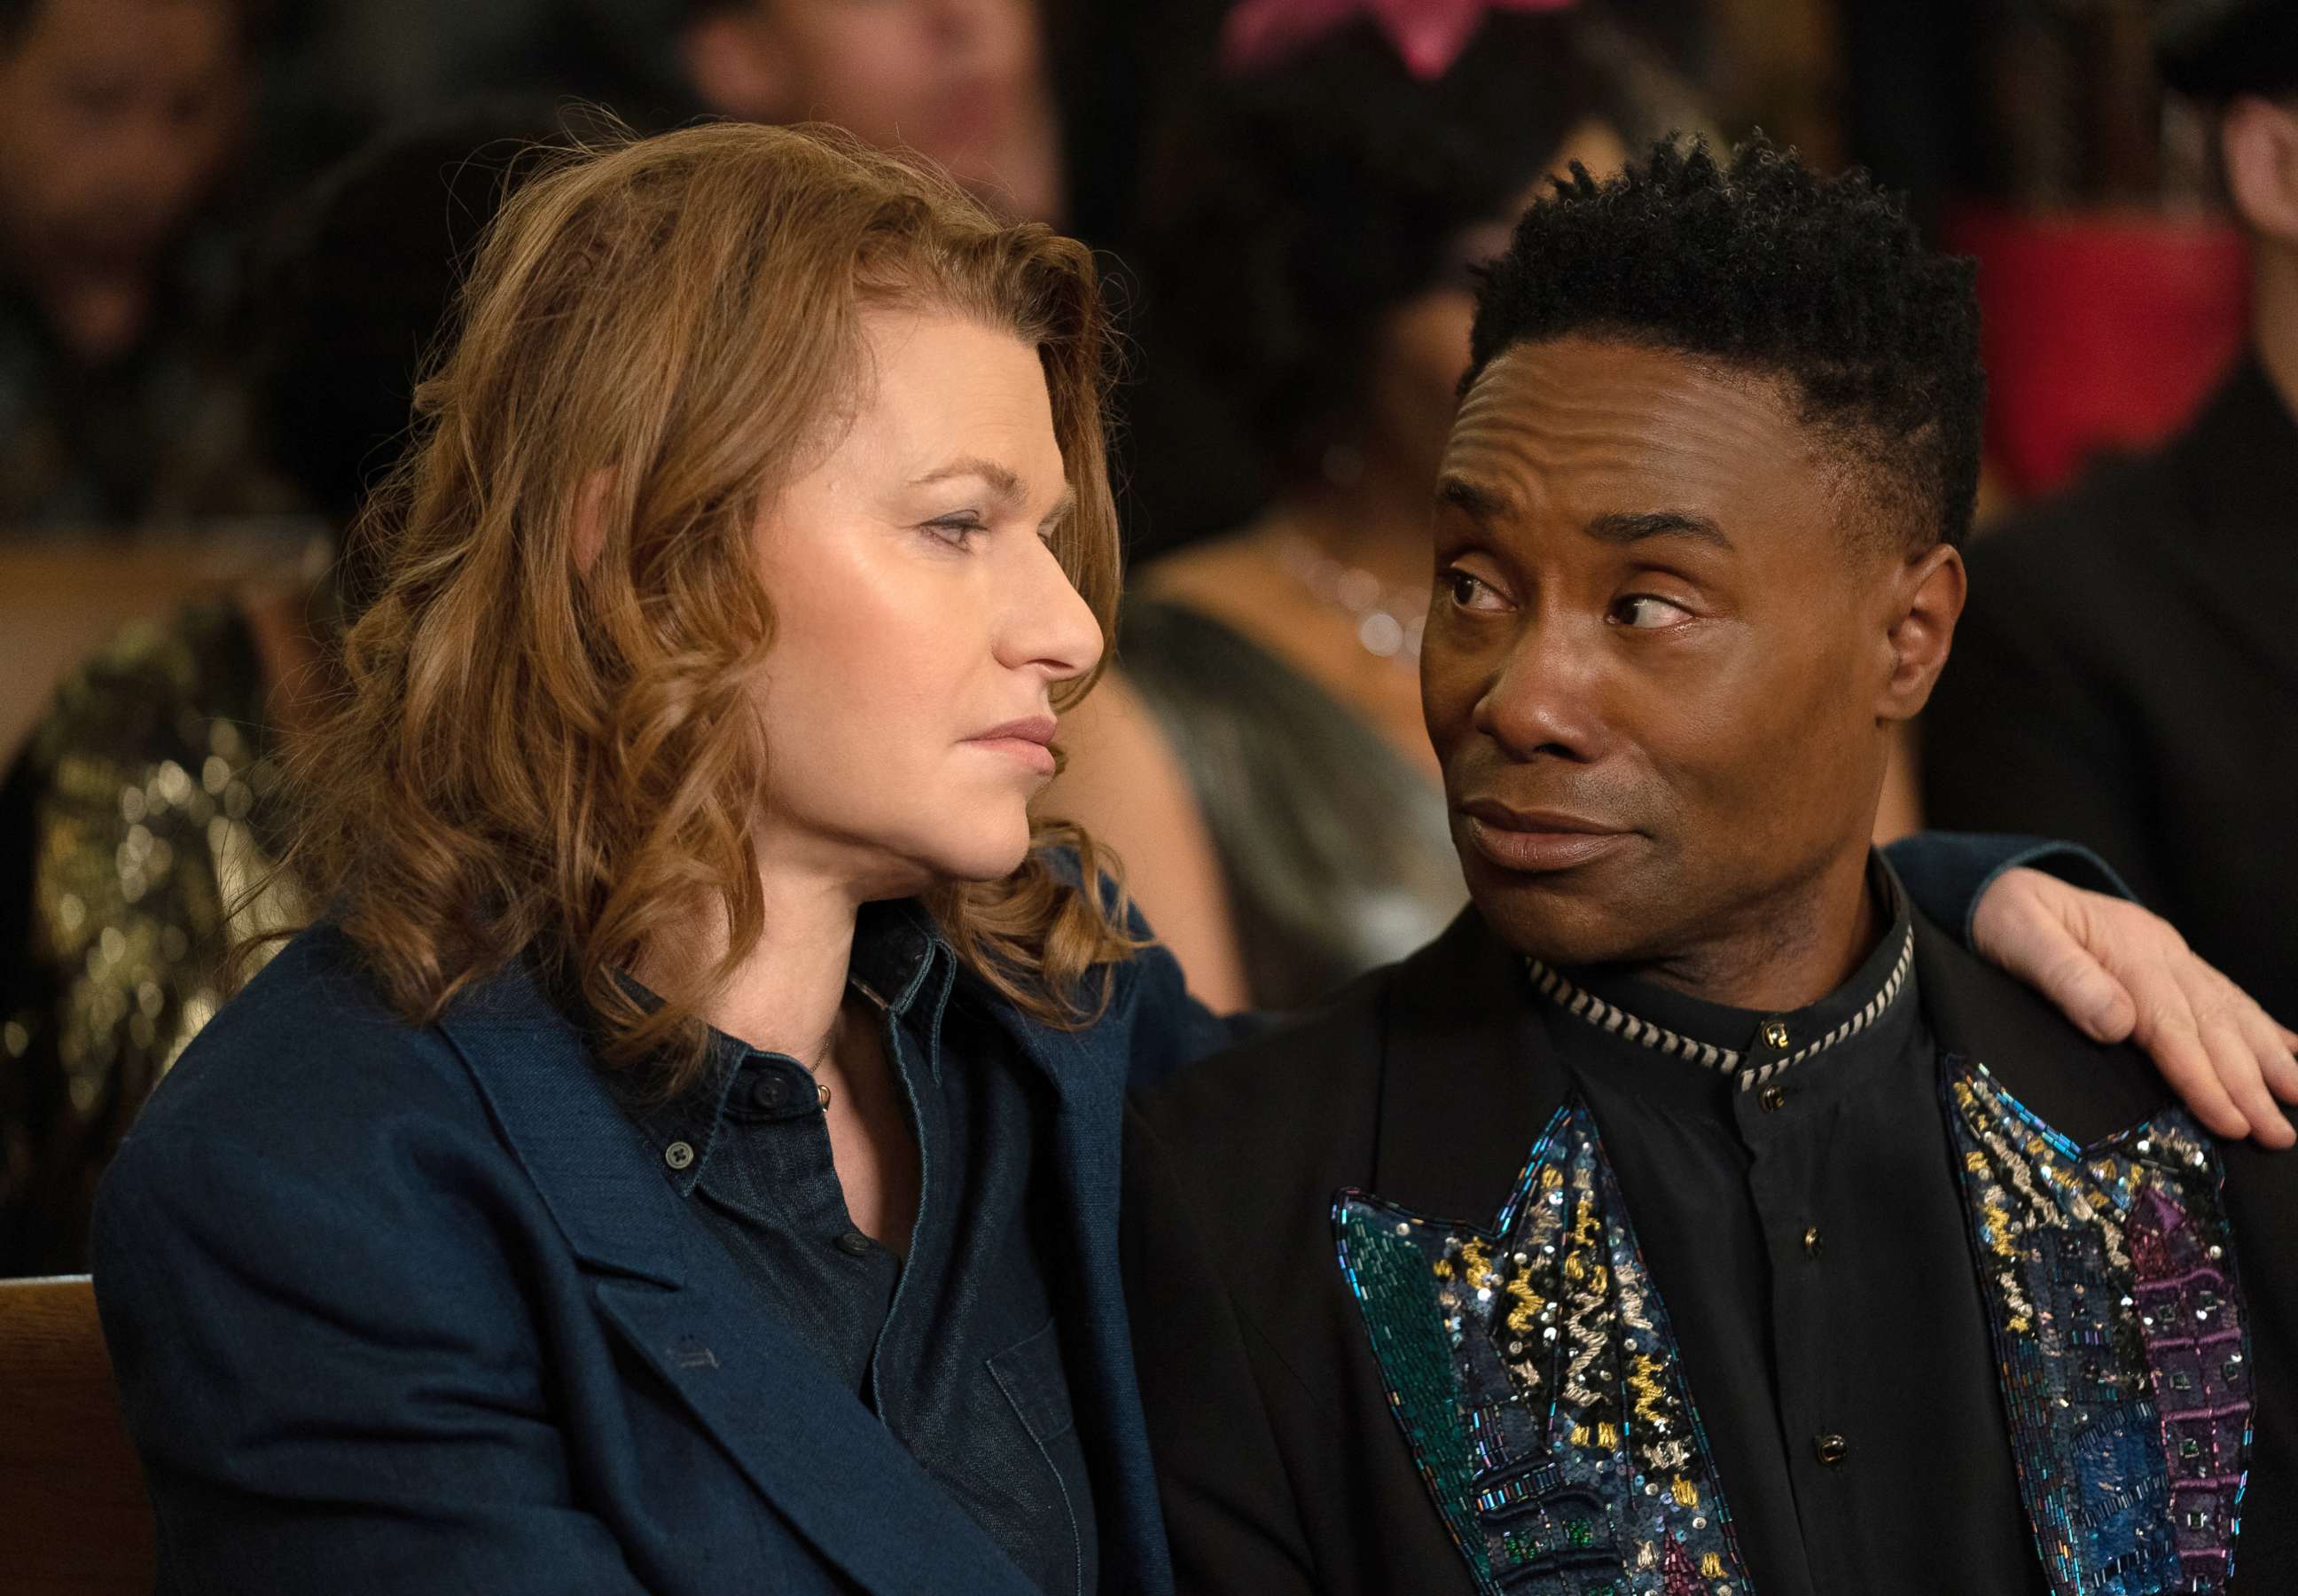 PHOTO: Sandra Bernhard, as Nurse Judy, and Billy Porter, as Pray Tell, in a scene from "Pose."